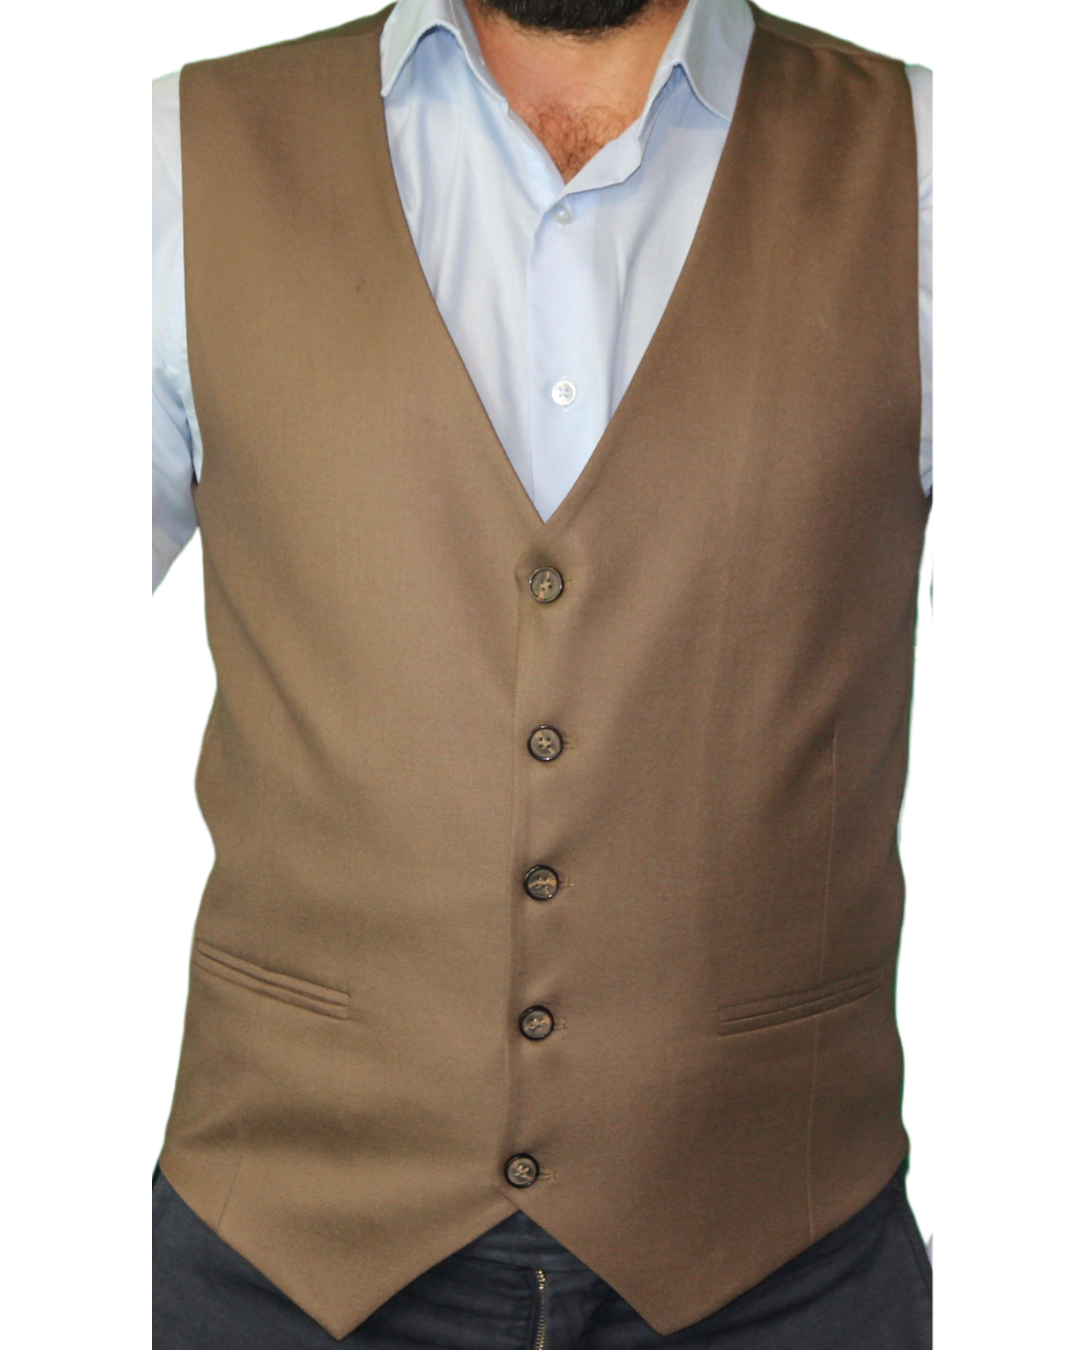 ICONIC BROWN - Brown Single Breasted Waistcoat